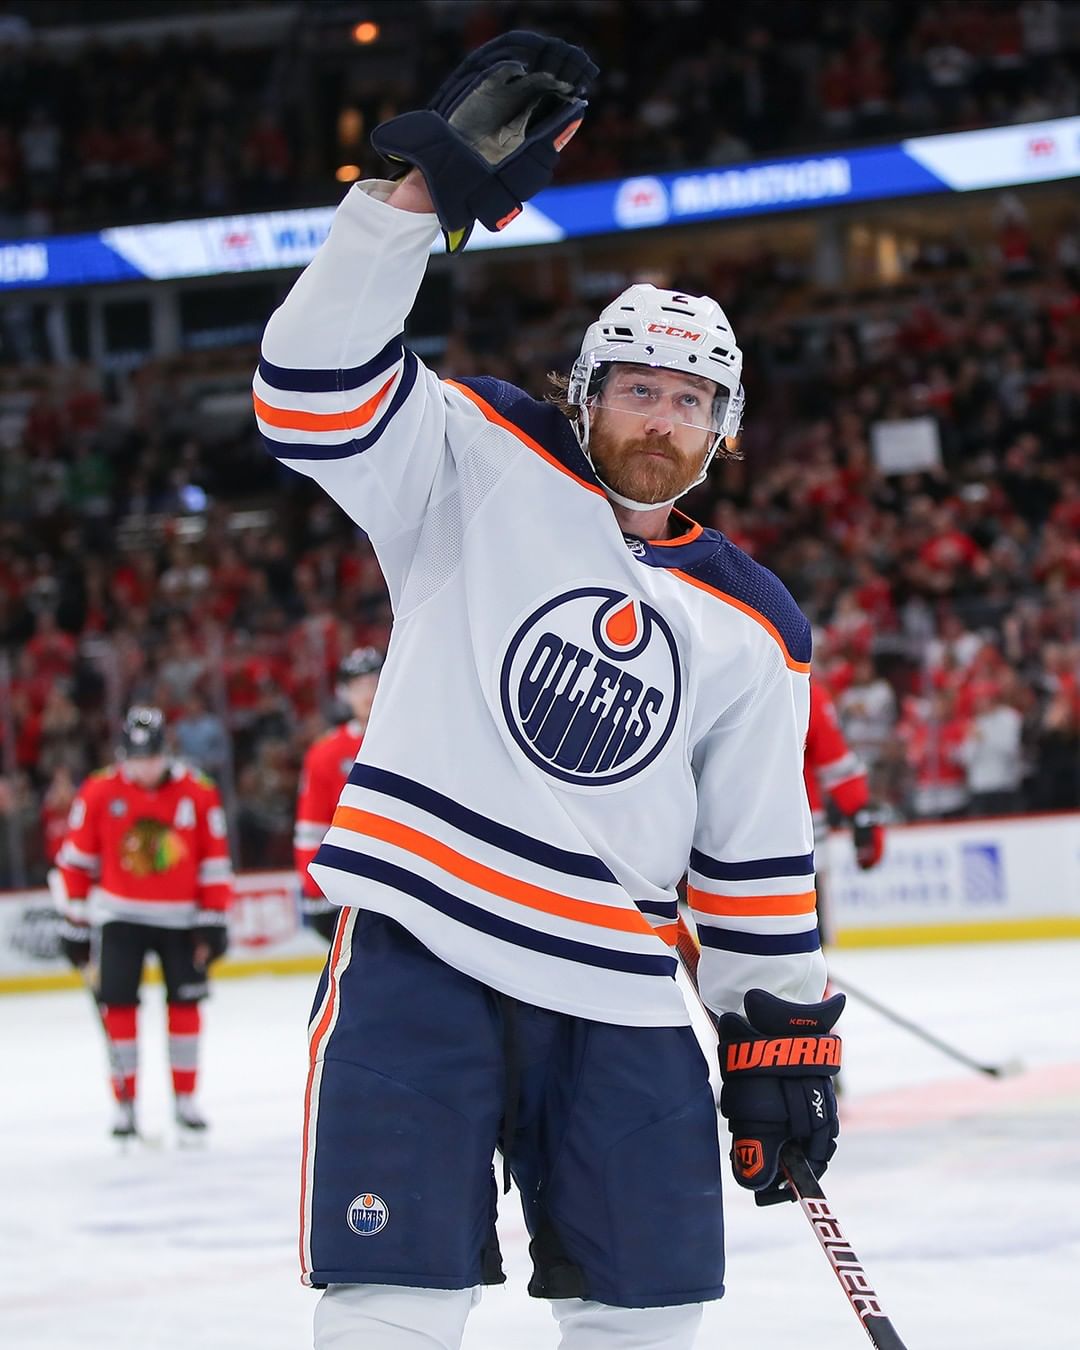 #Oilers defenceman Duncan Keith has announced his retirement. Thank you, Duncan,...